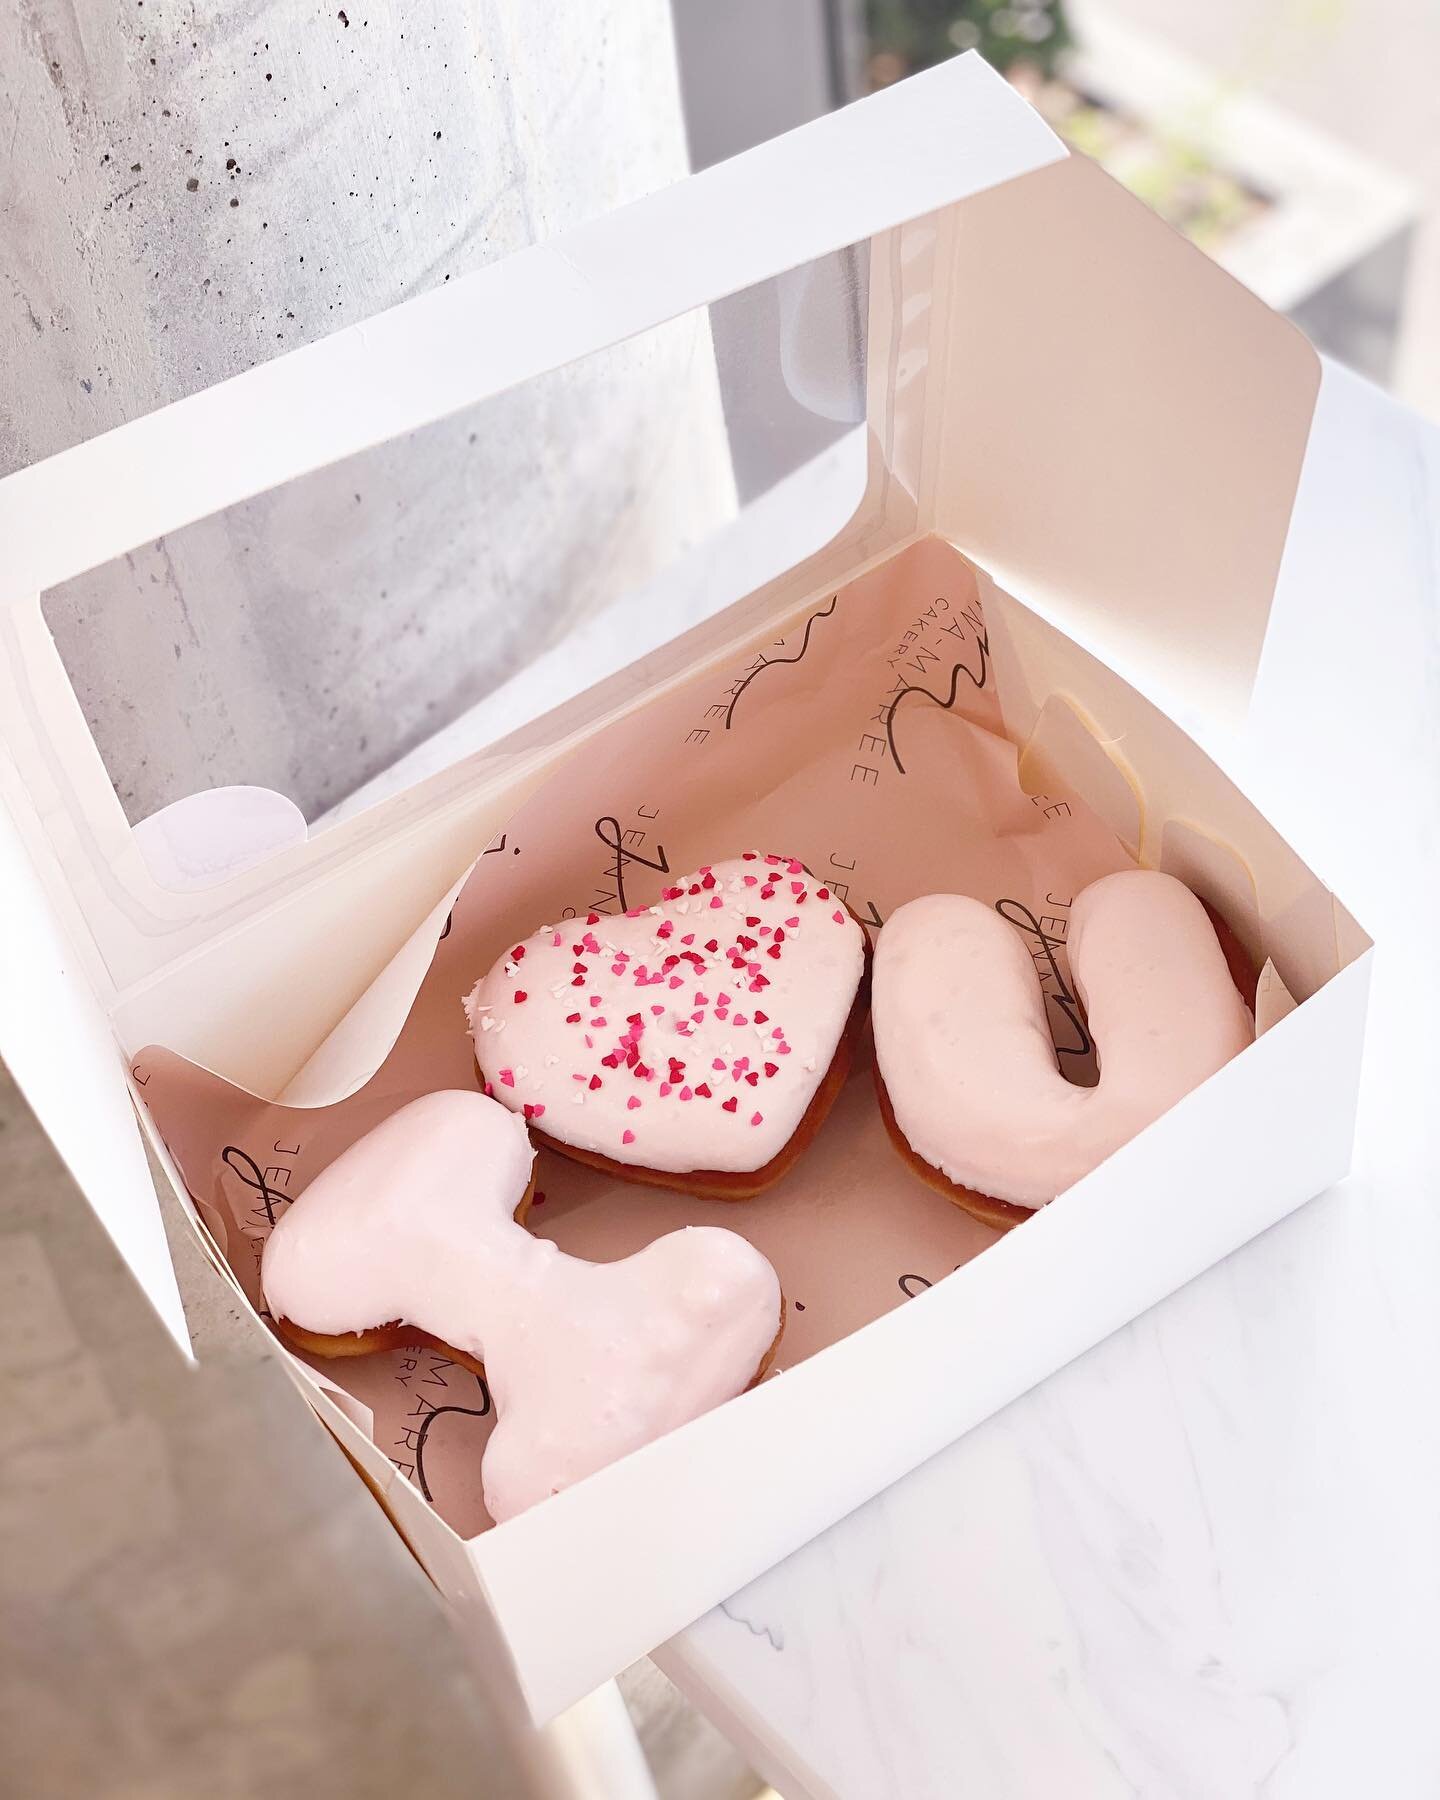 Valentines donuts will be in store this Friday and Saturday 😍😍